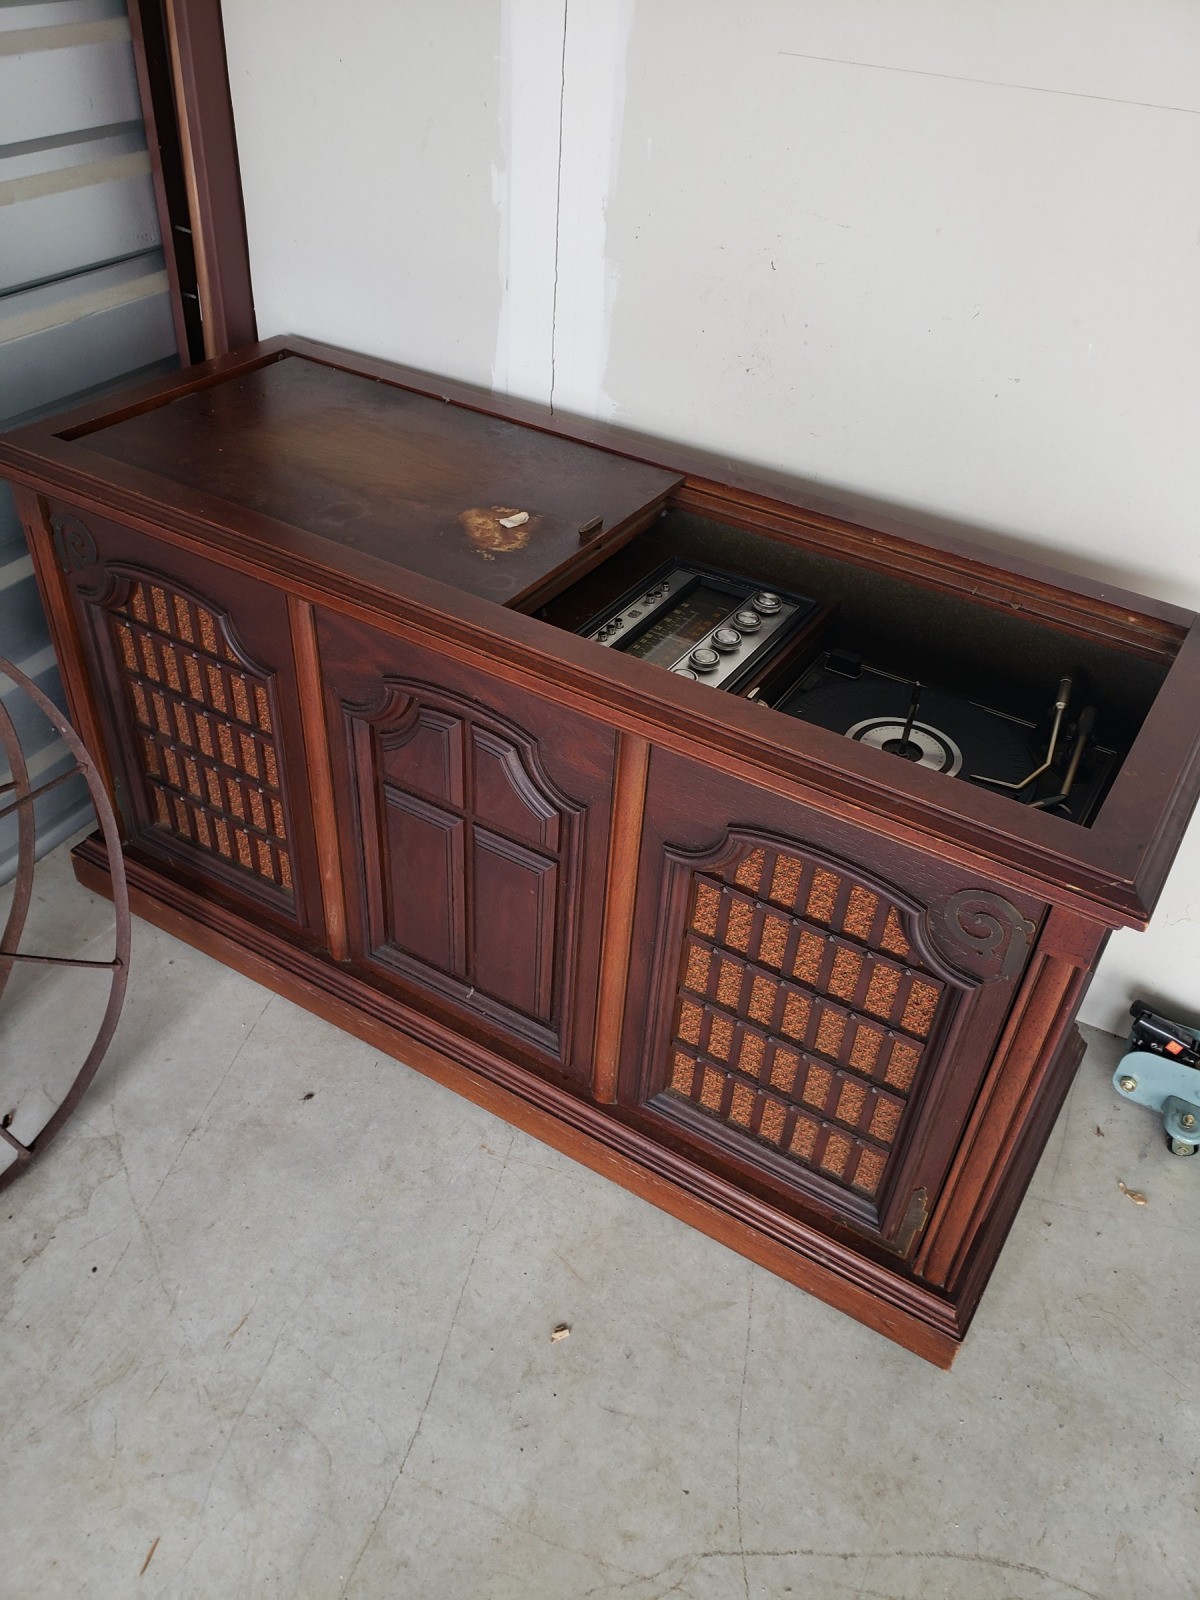 Value Of A Vintage Console Stereo System Thriftyfun